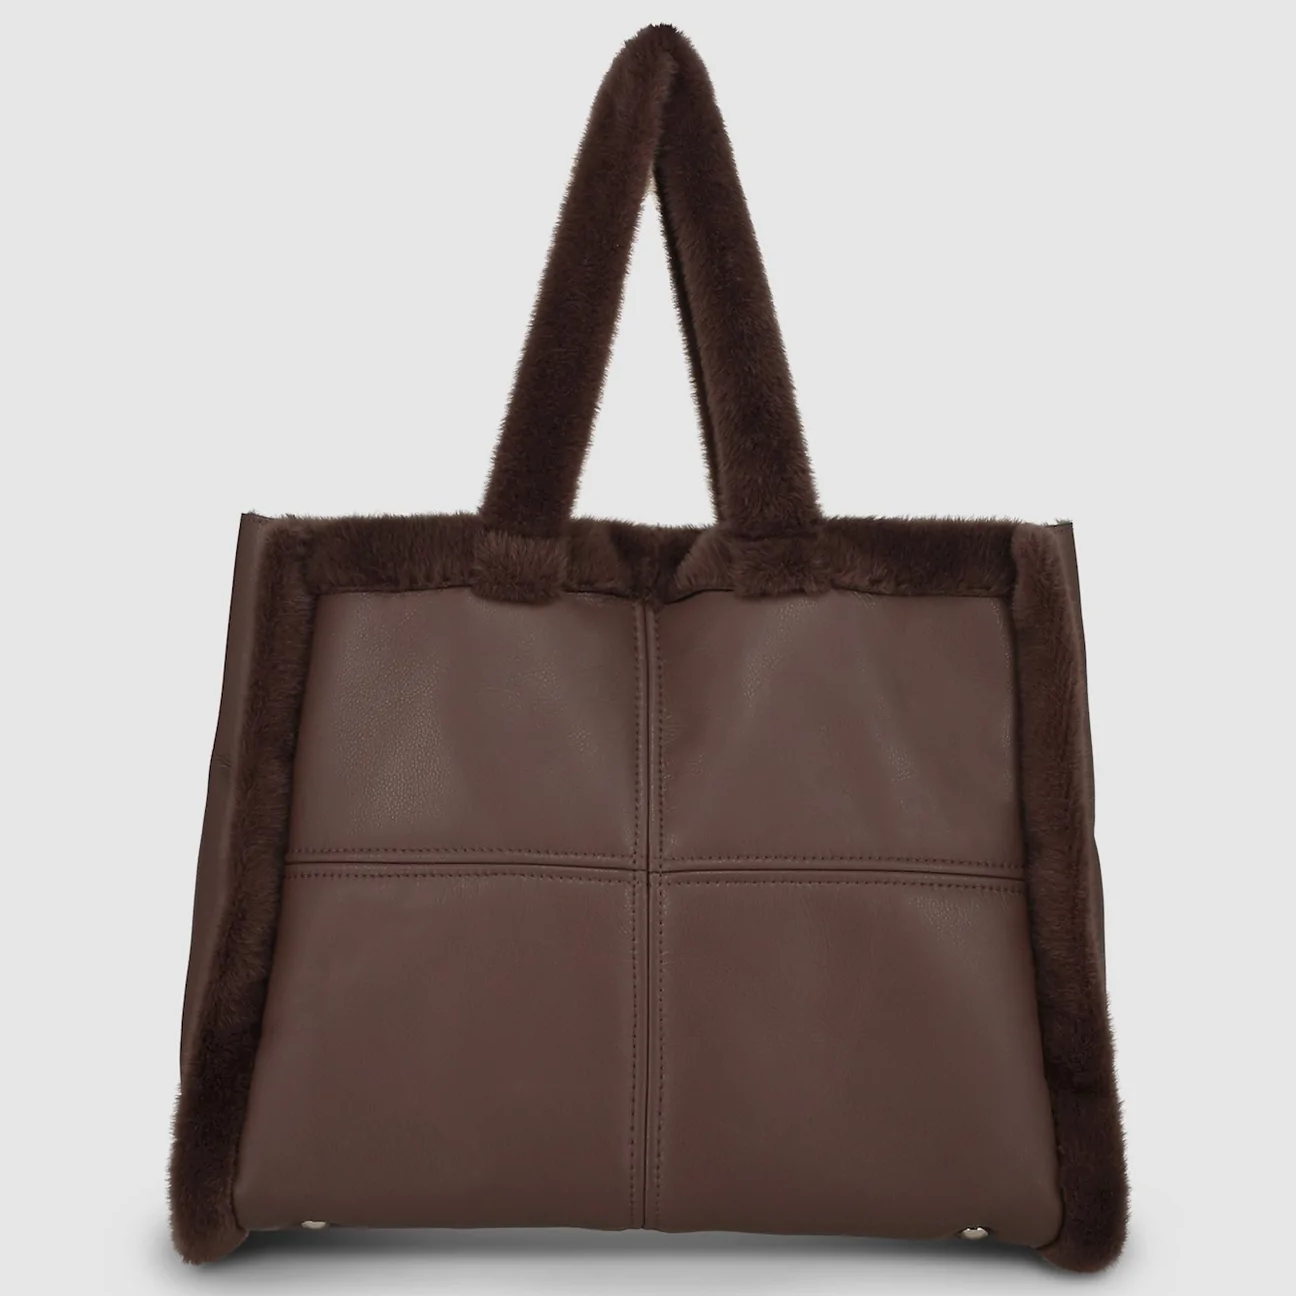 Gotstyle Fashion - Rino and Pelle Bags Faux Fur Trim Vegan Leather Tote Bag - Brown